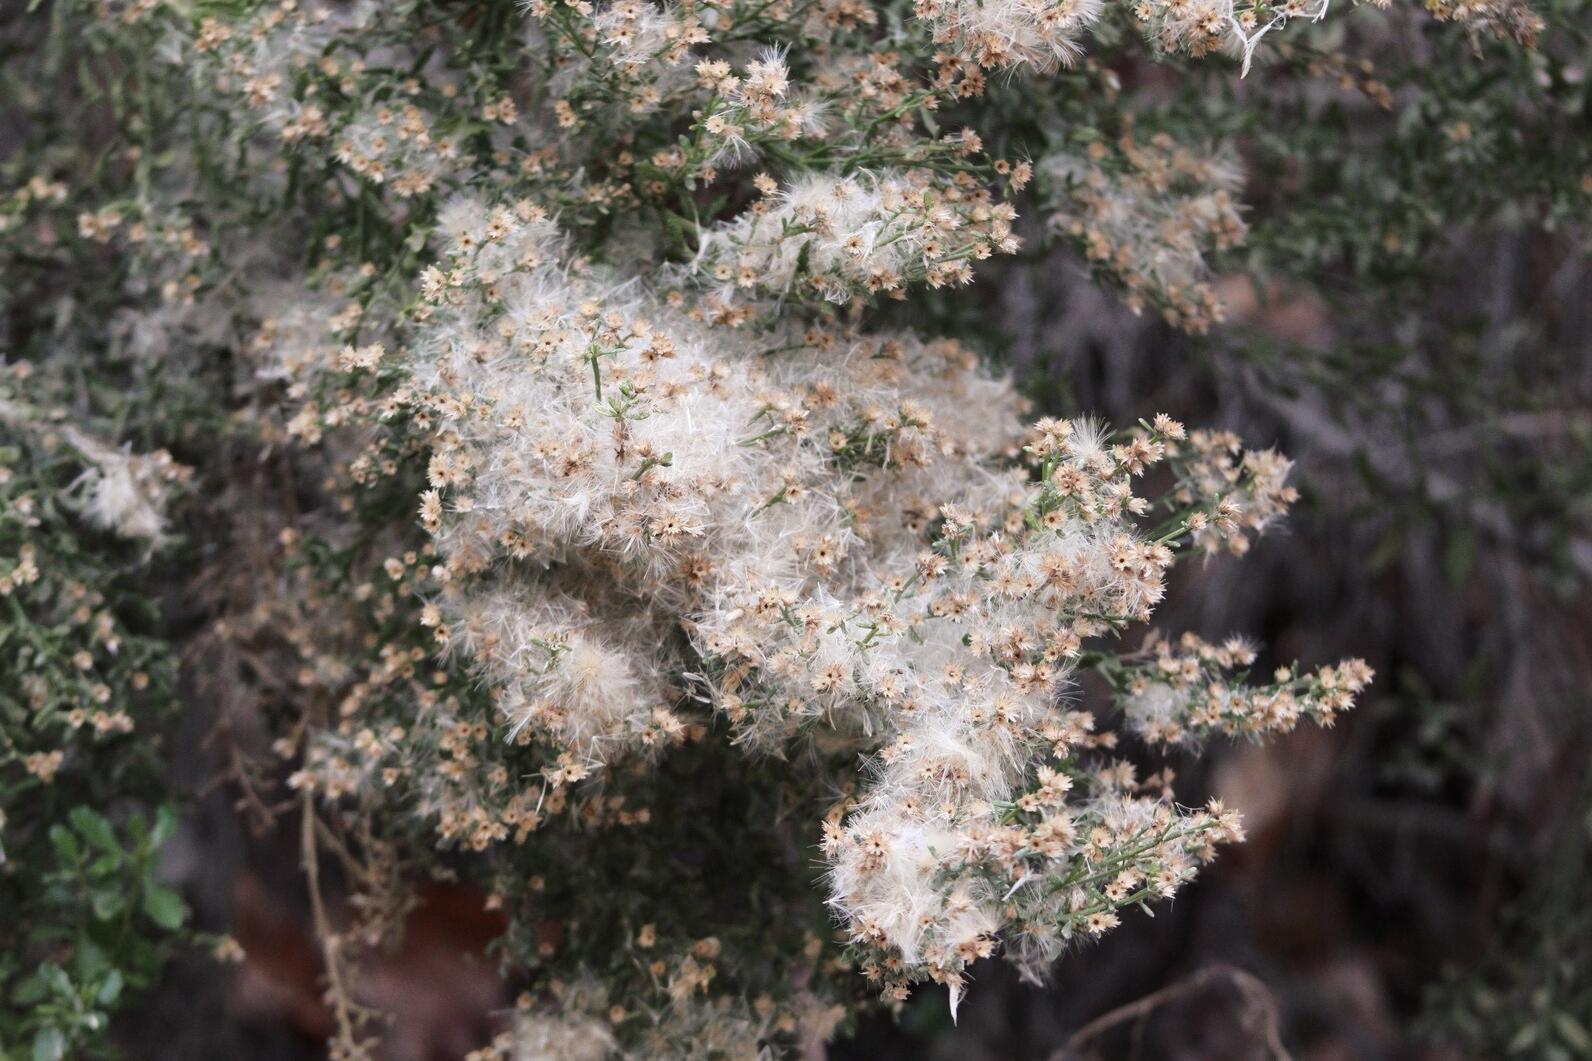 Coyote bush (Baccharis pilularis) with fluffy white seeds.